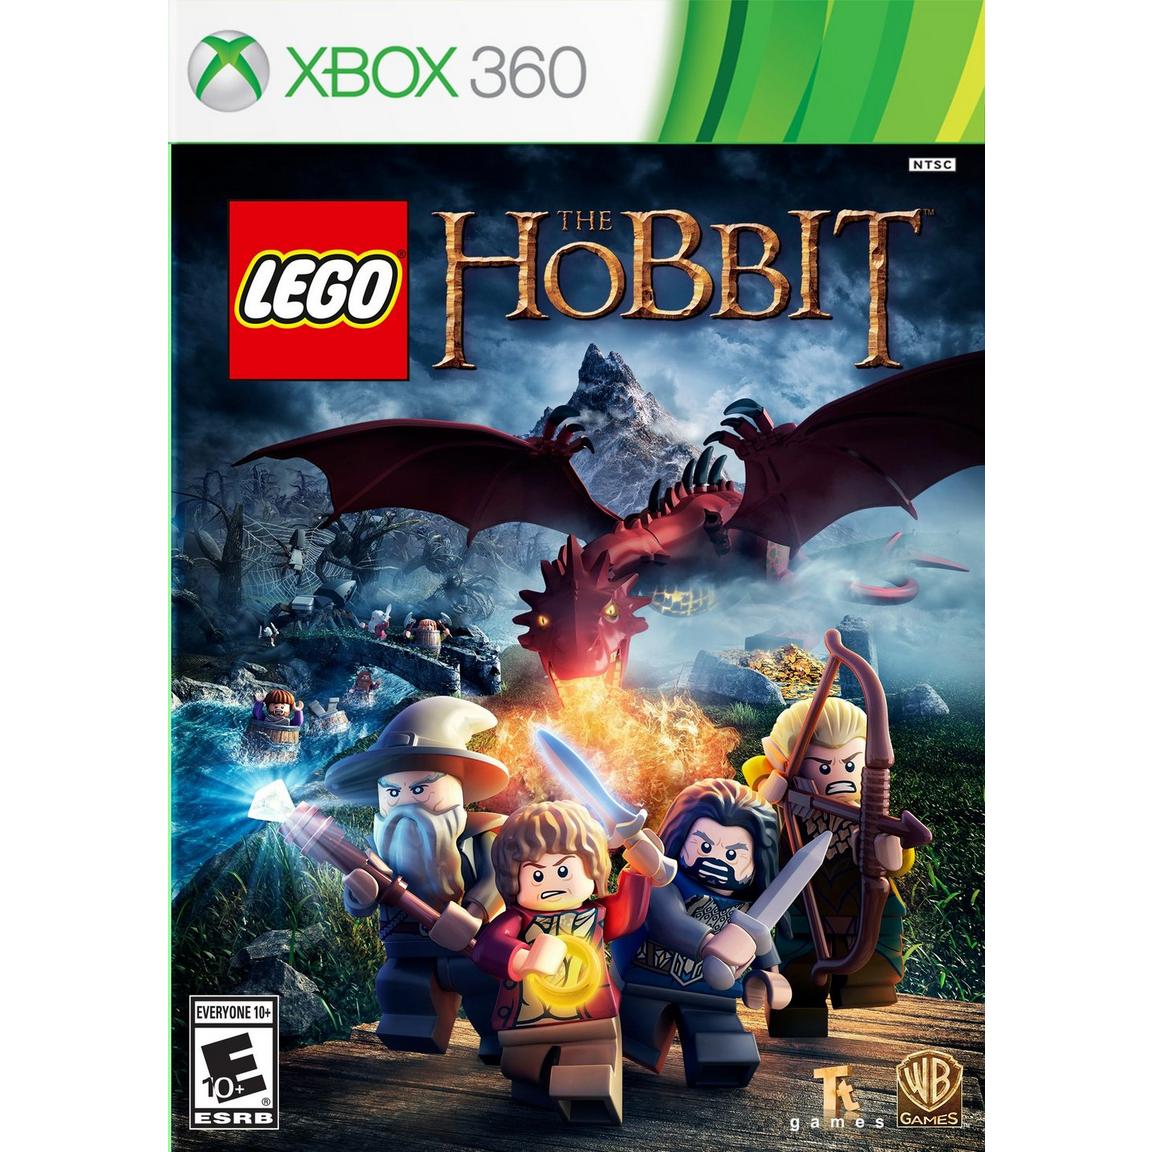 LEGO The Hobbit - Xbox 360, Pre-Owned -  Warner Bros. Interactive Entertainment